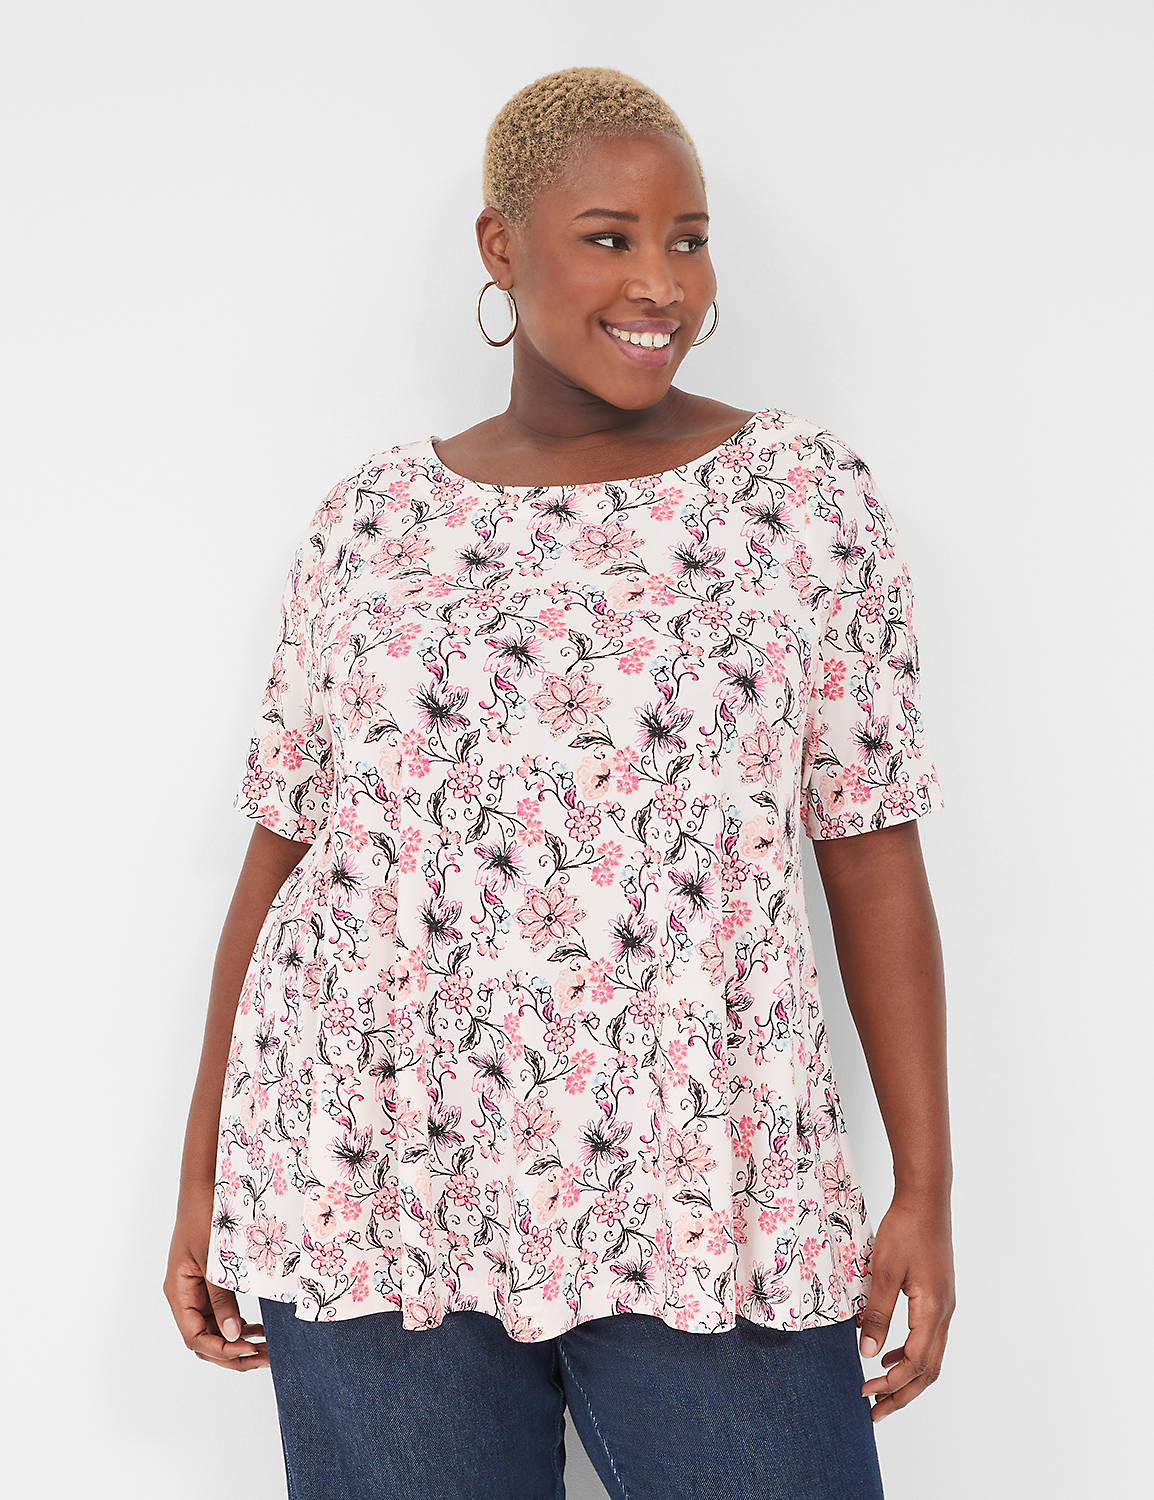 WV Gallery Neck Swing Top S 1142381 Product Image 1